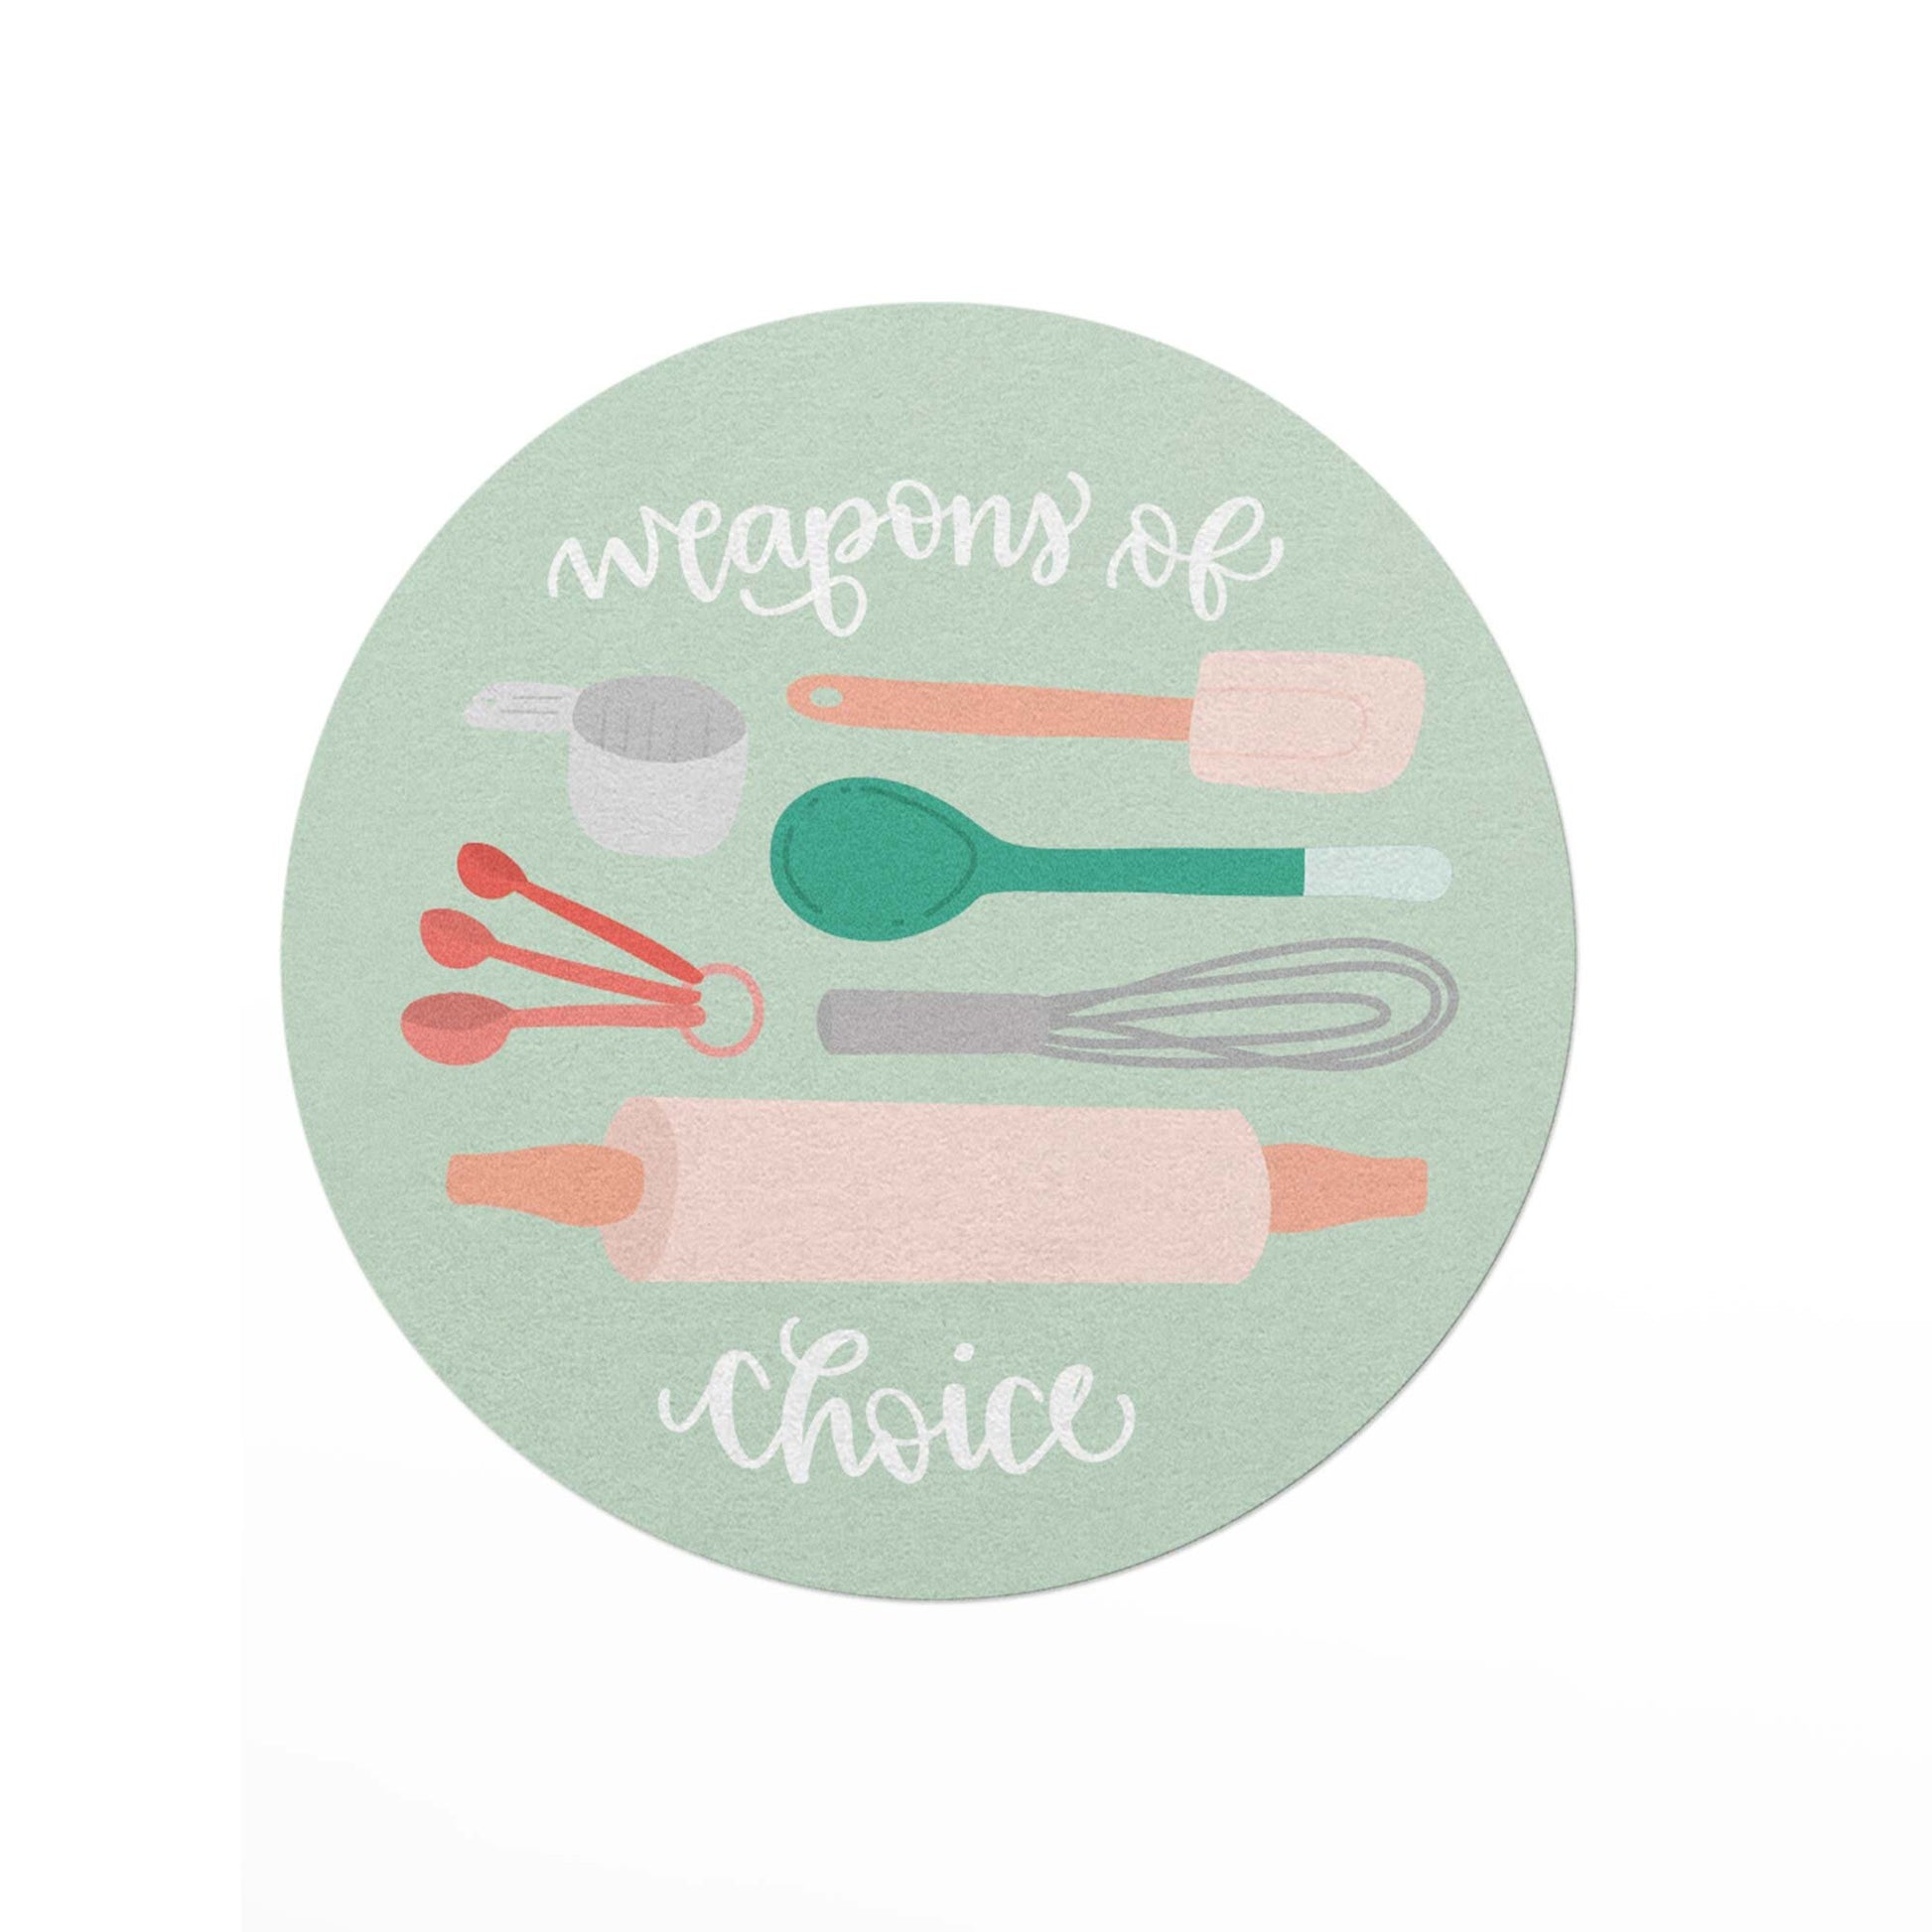 baking themed vinyl sticker with simple illustrations of baking tools on a green background and the white lettered ext, weapons of choice.